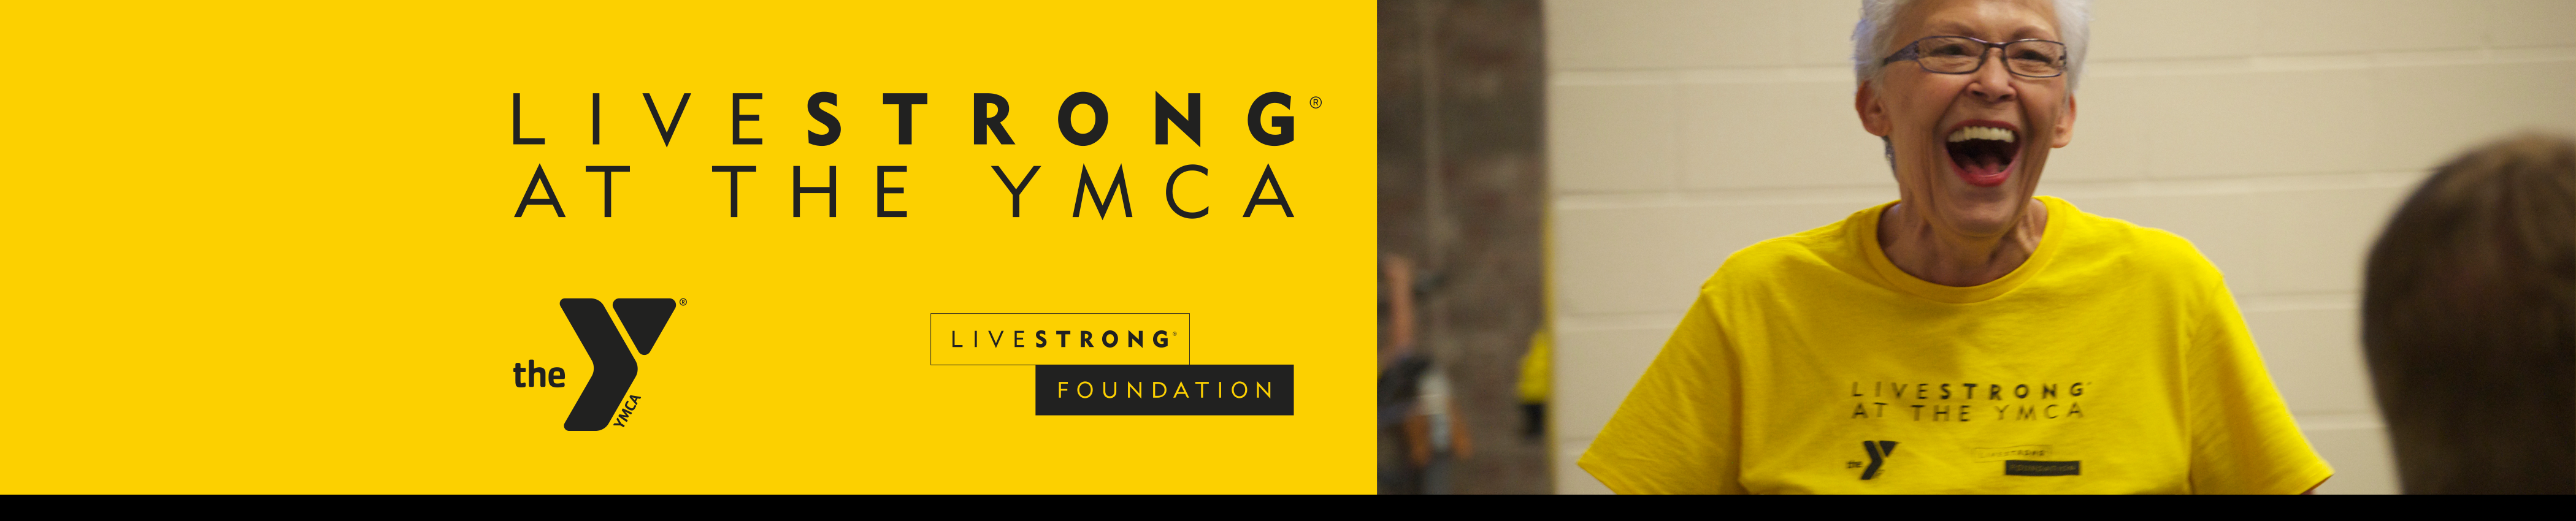 YMCA LIVESTRONG